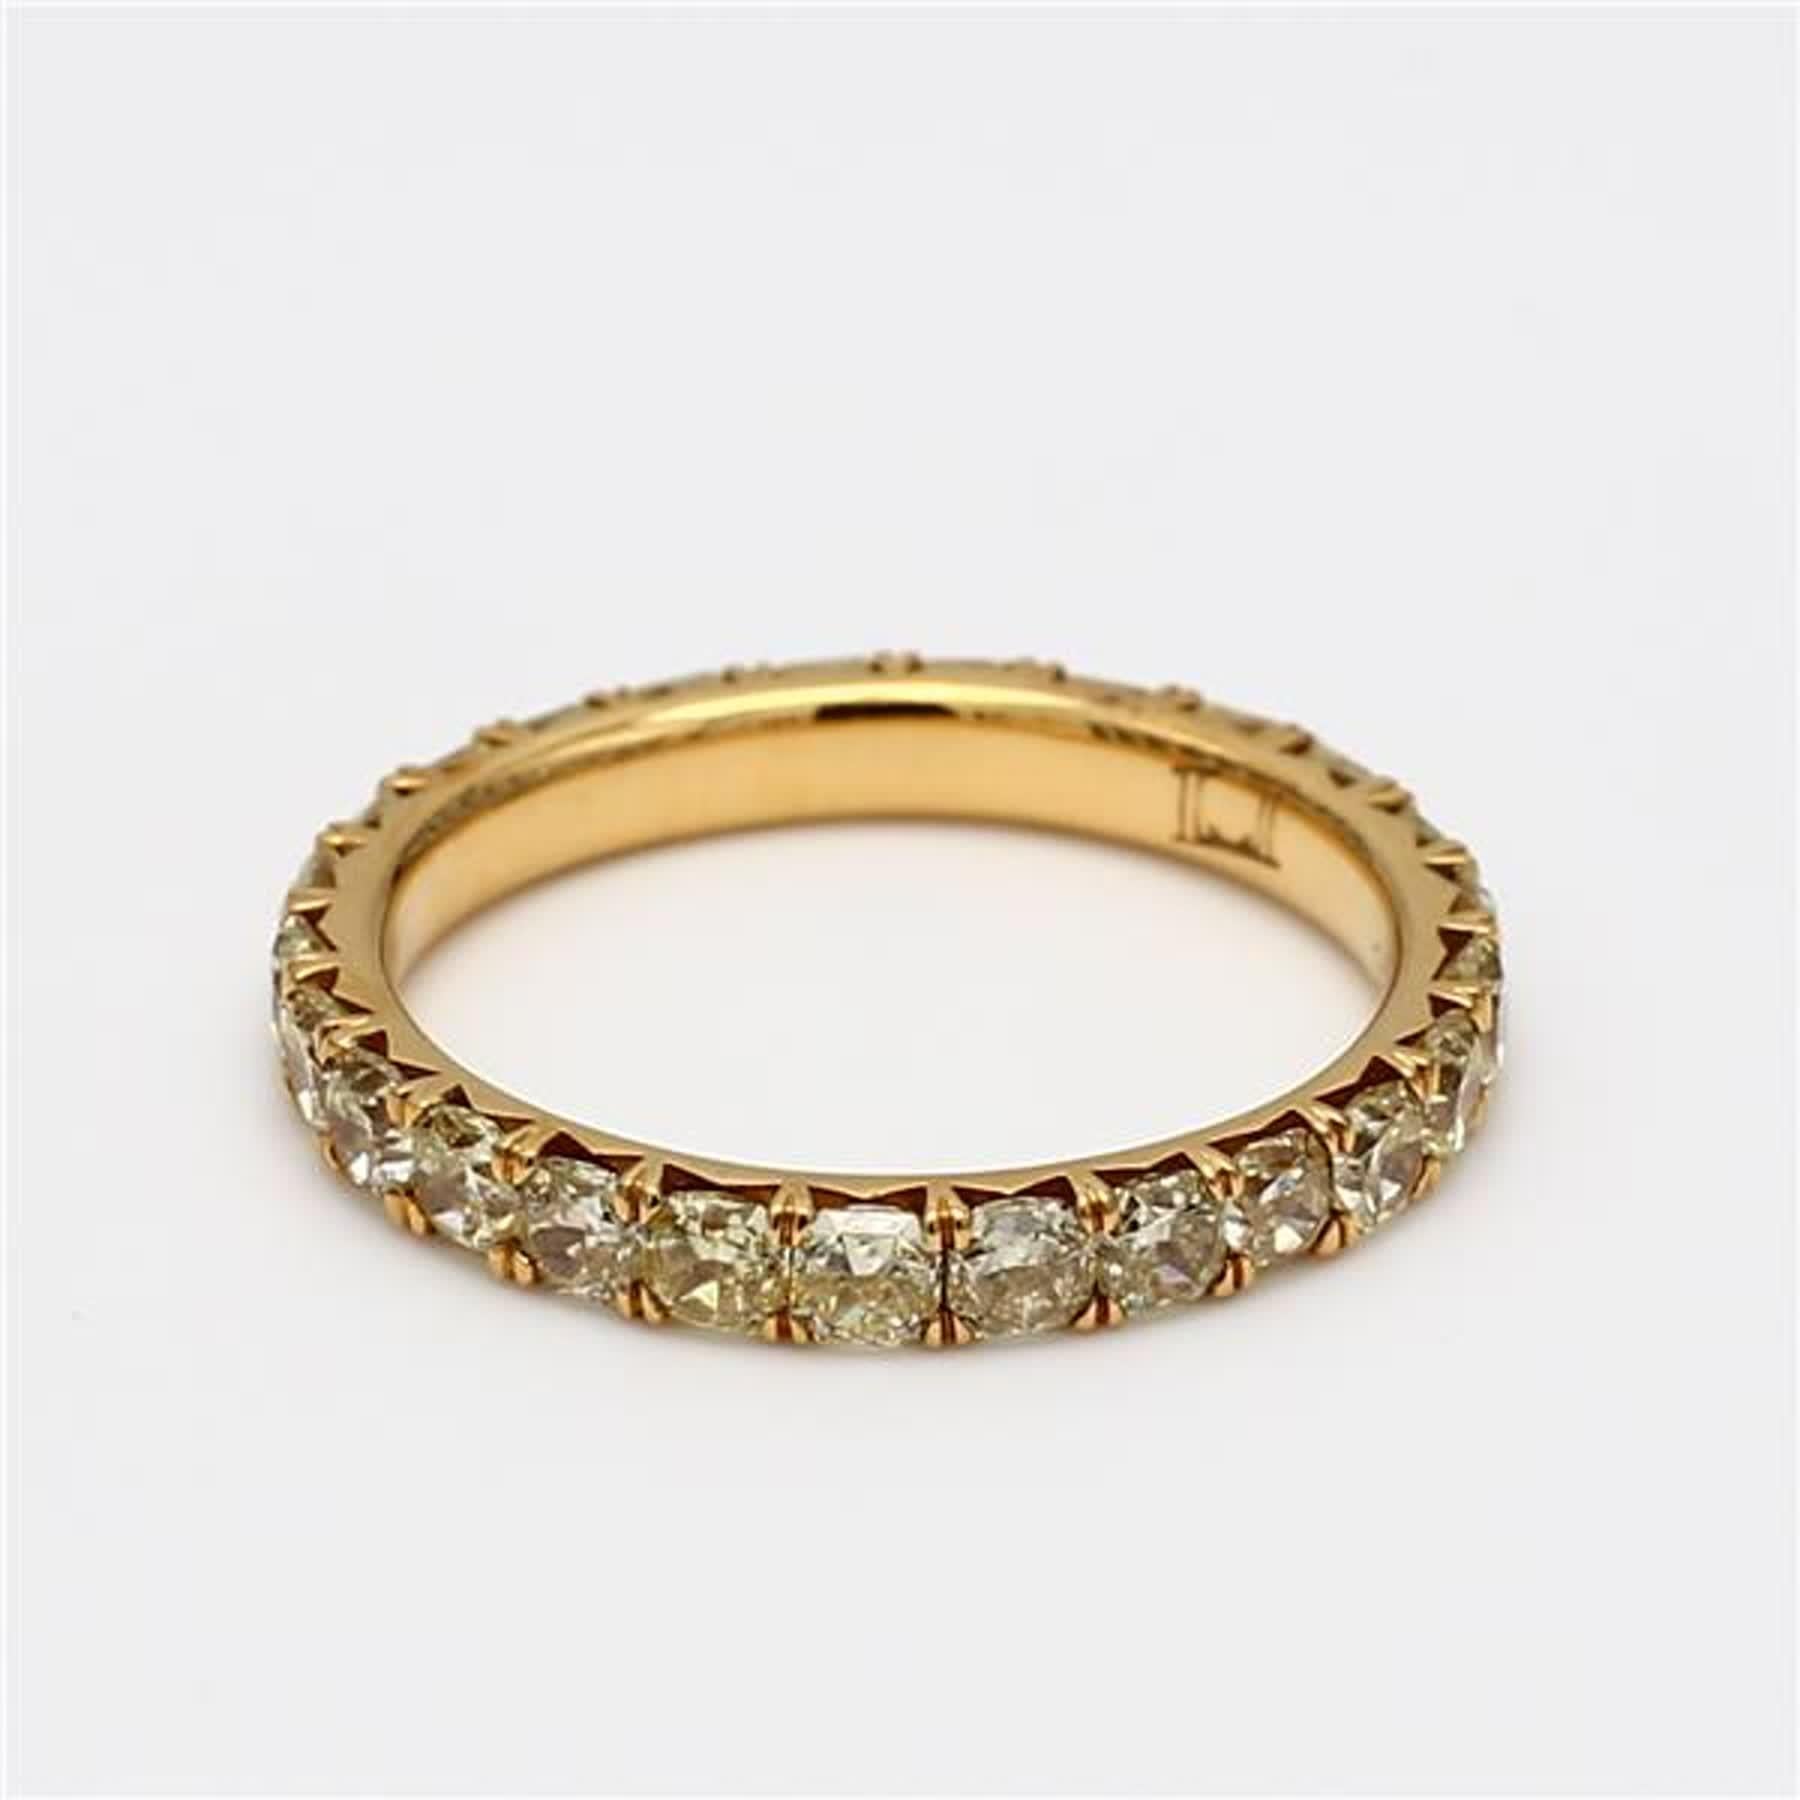 RareGemWorld's classic diamond band. Mounted in a beautiful 18K Yellow Gold setting with natural radiant yellow diamond's. This eternity band is guaranteed to impress and enhance your personal collection!

Total Weight: 1.91cts

Diamond